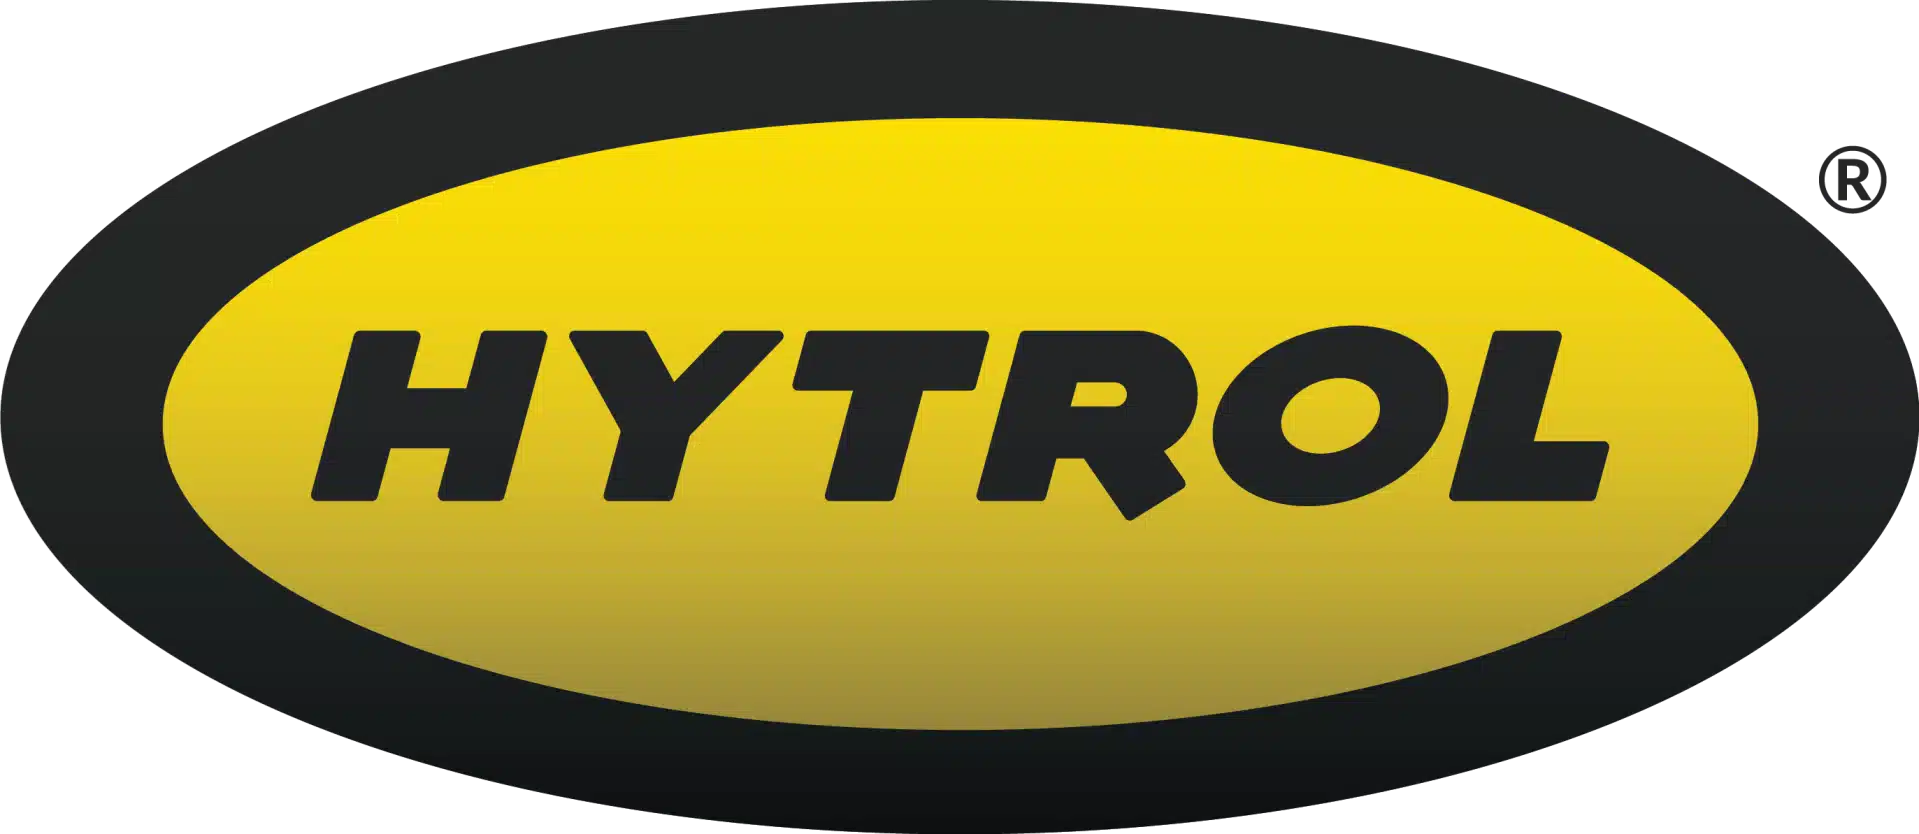 Hytrol Logo: A golden oval with the company name.